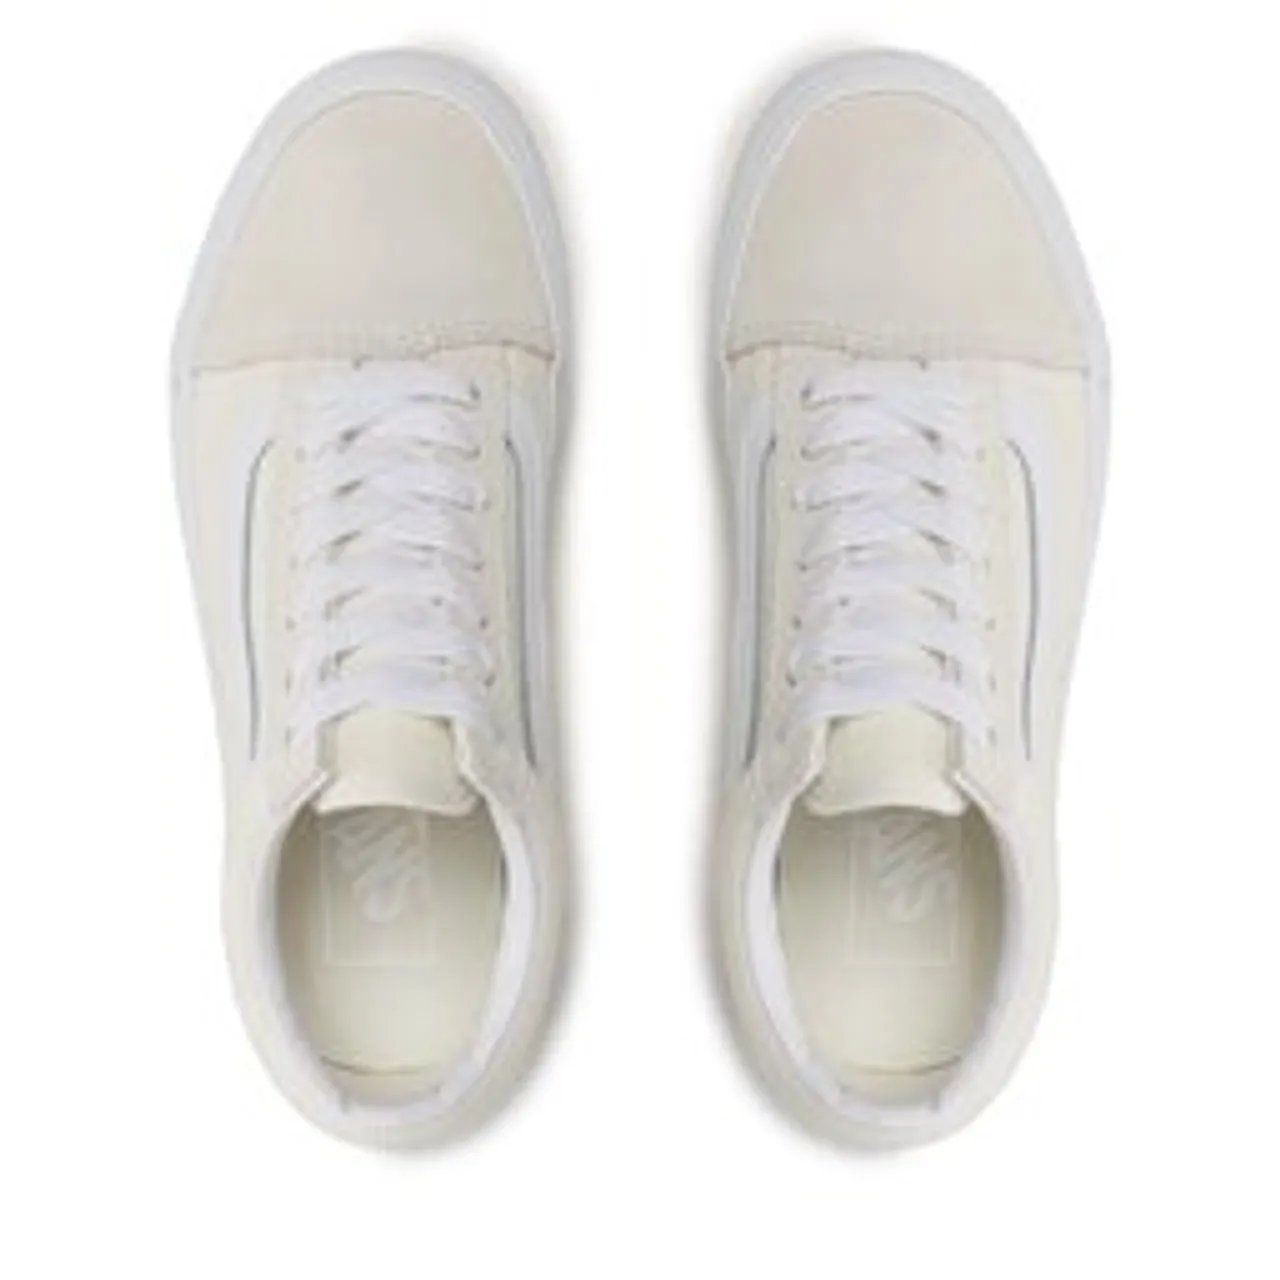 Sneakers aus Stoff Vans Old Skool Stackform VN0009PZCCZ1 Marshmallow